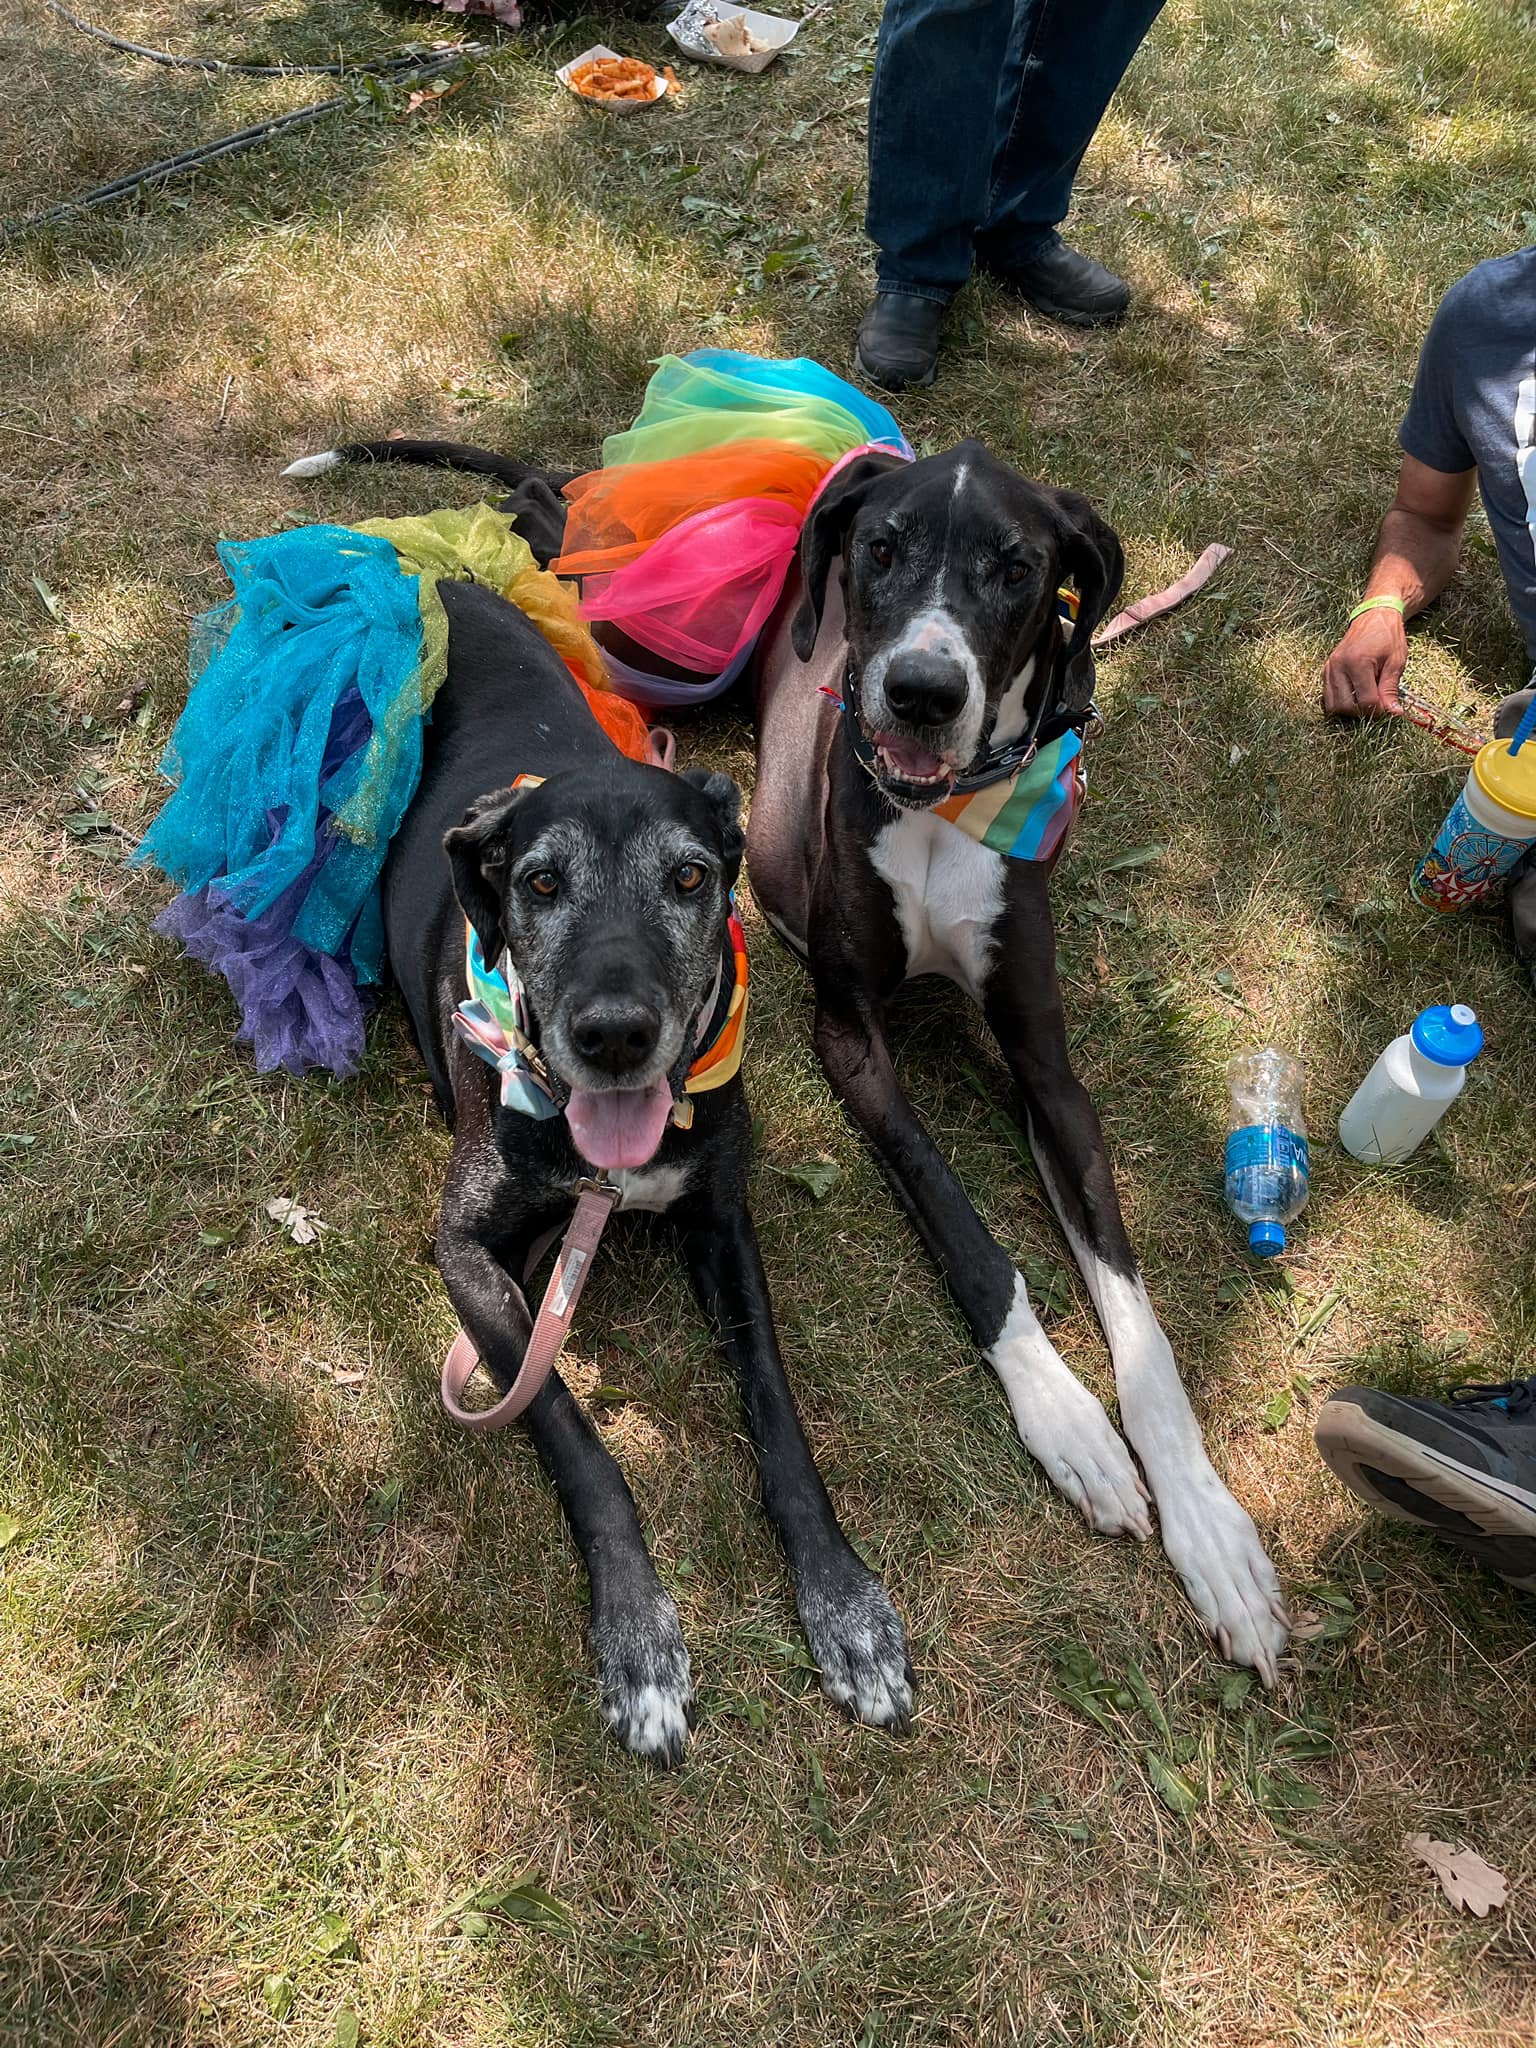 Madonna and Clifton at Minneapolis Pride